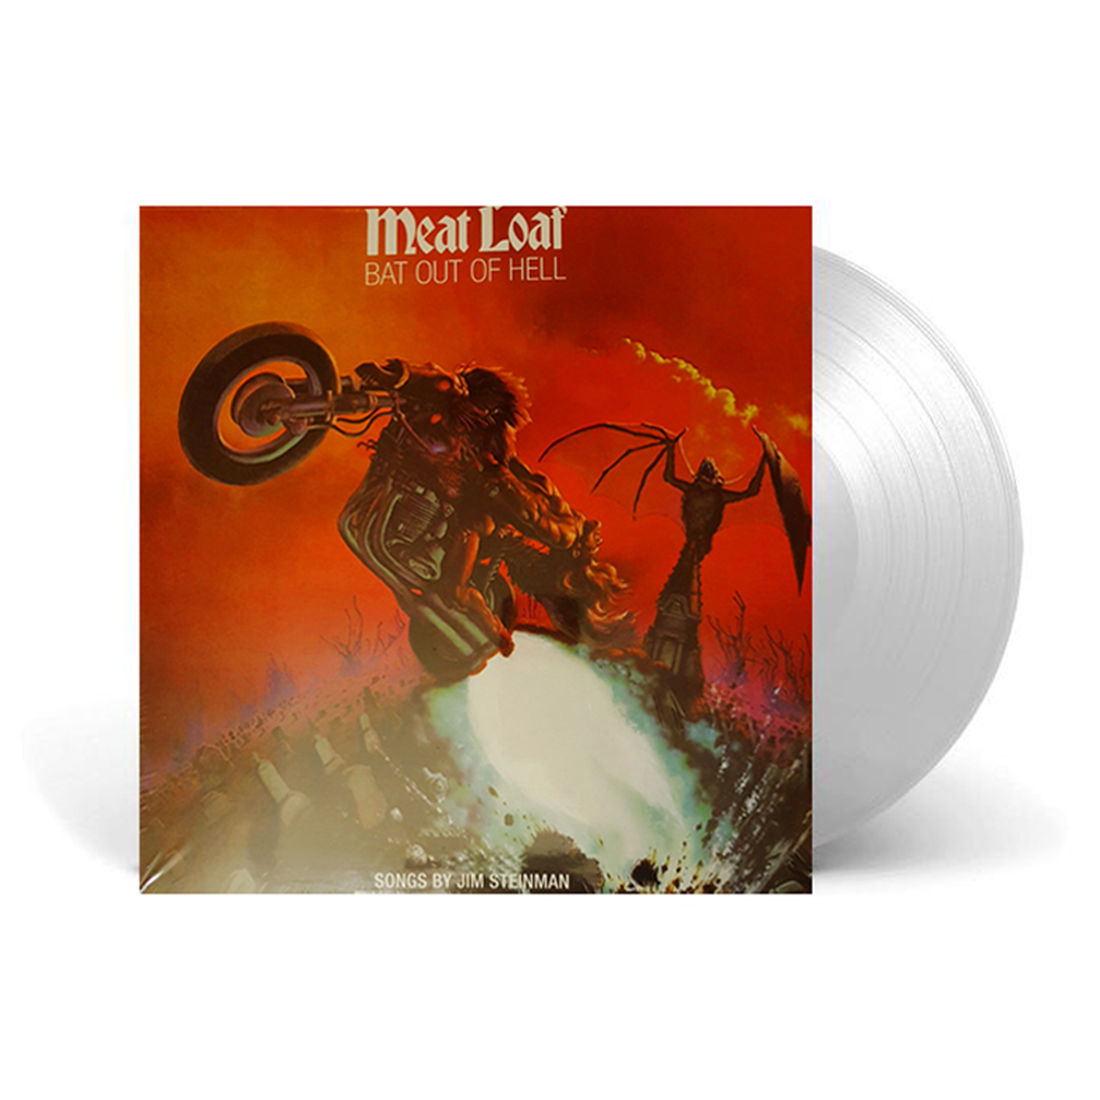 Meatloaf - Bat Out of Hell: Limited Edition Clear Vinyl LP